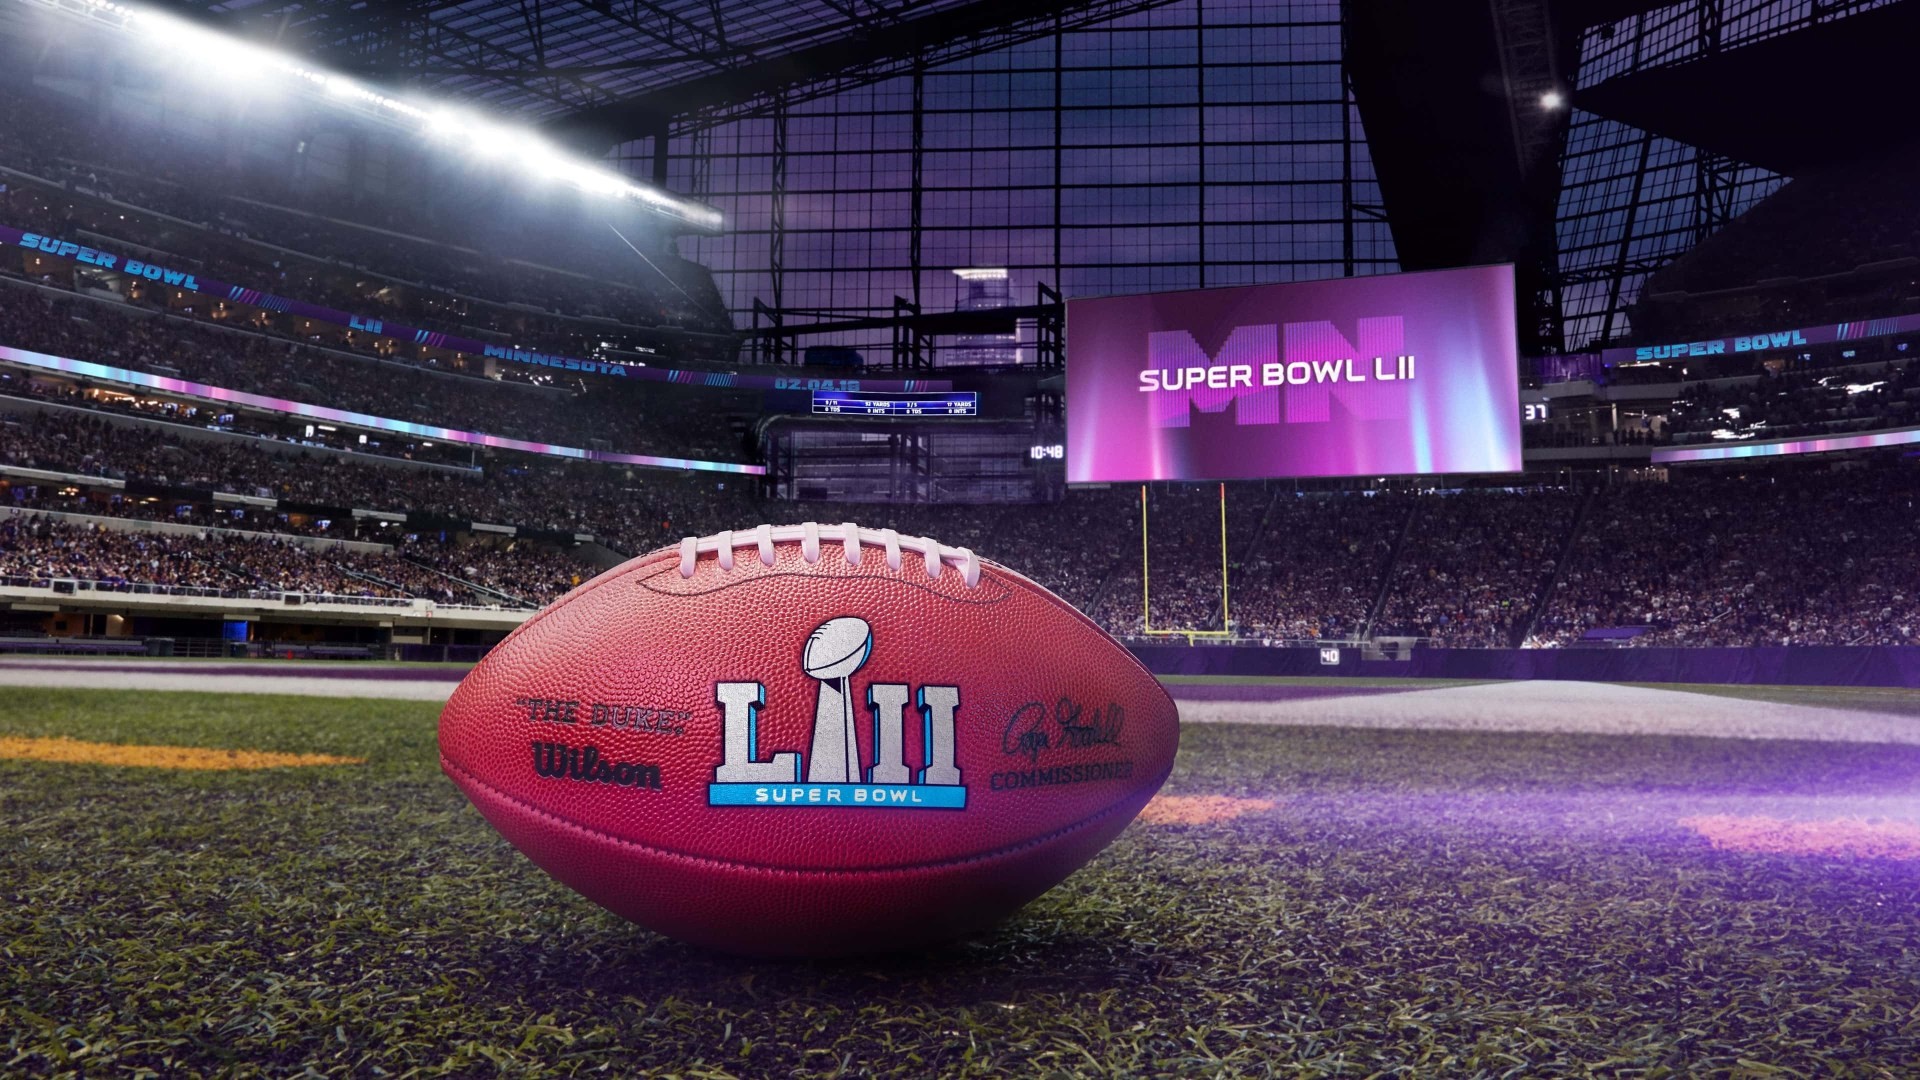 1920x1080 8 all-night parties showing Super Bowl 2018 live in Budapest